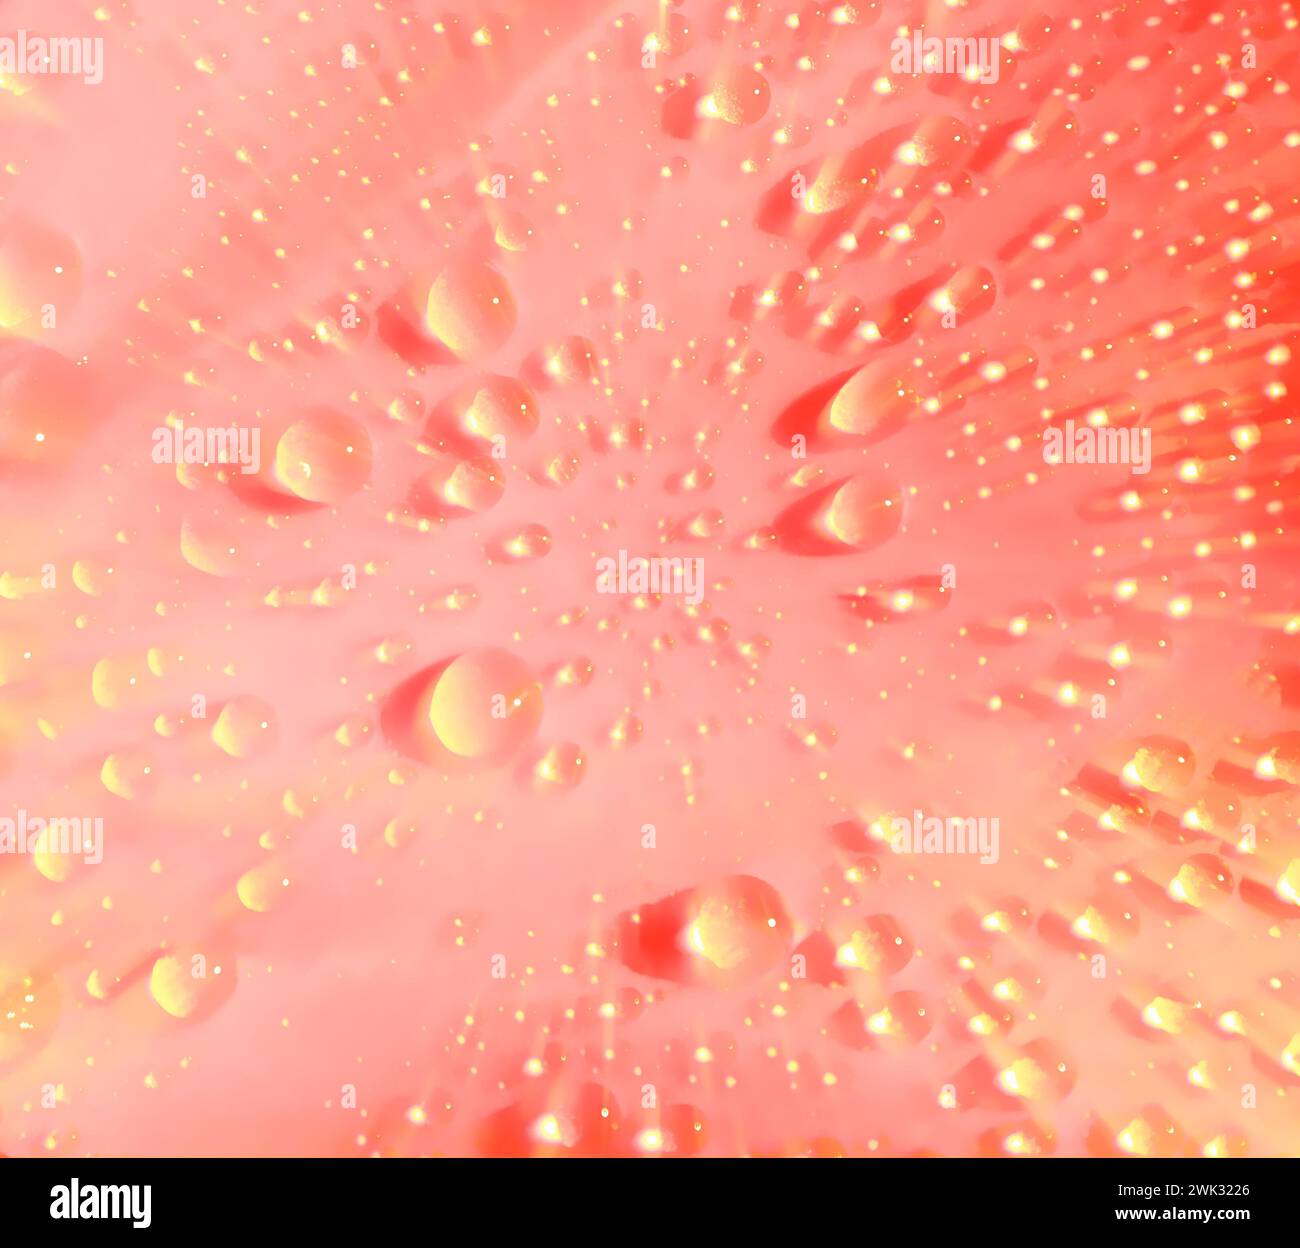 Positive blurred painted background. Bright splashes. Dew. Drops of water on a light background. Stock Photo